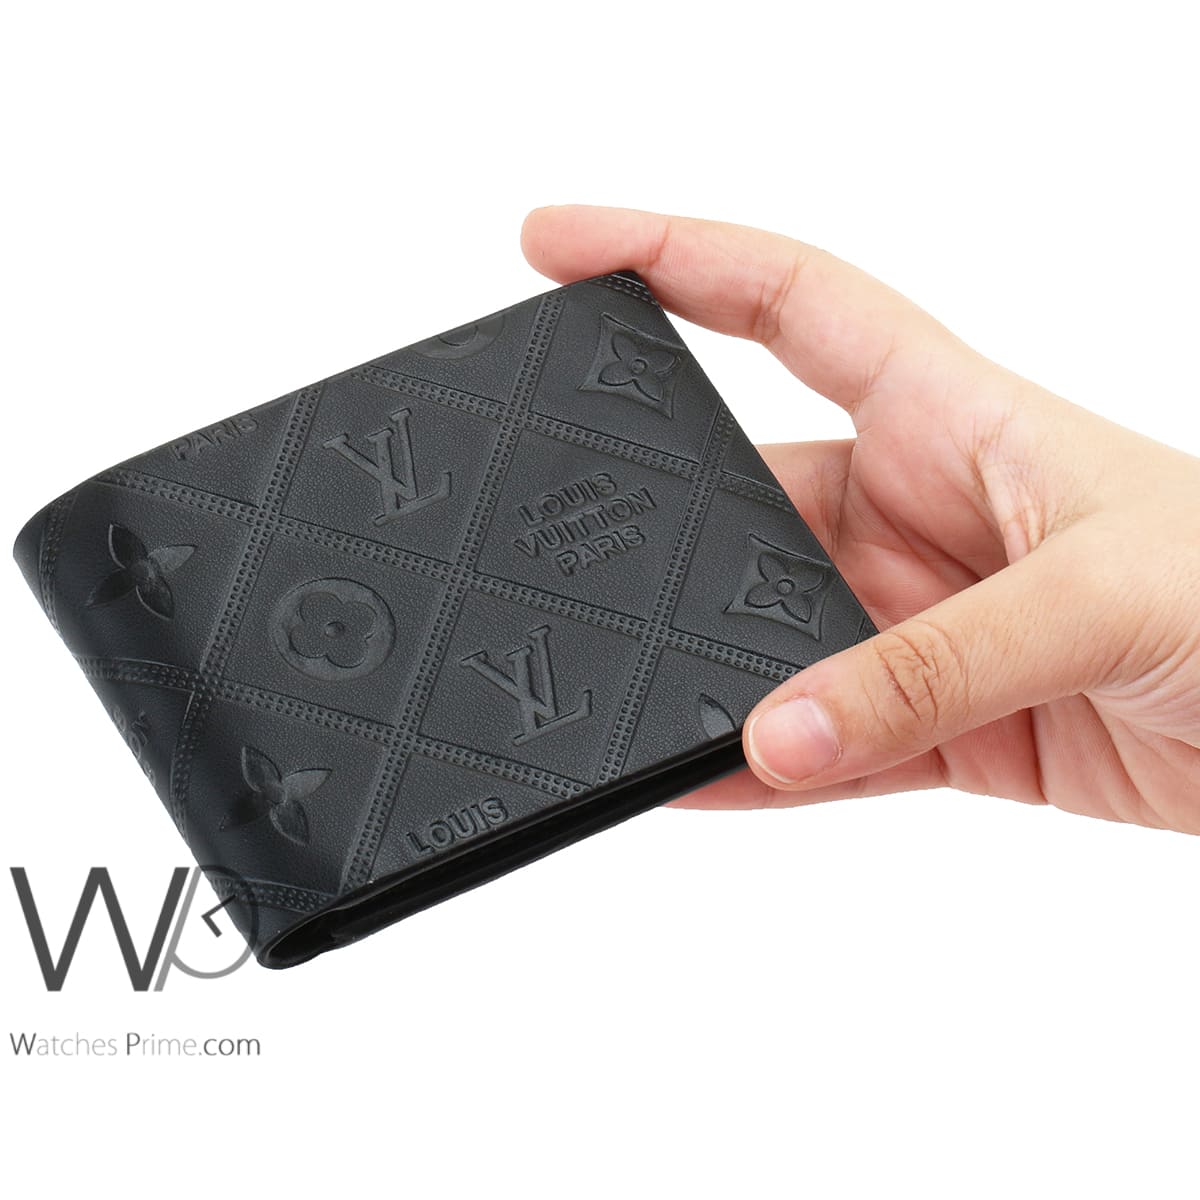 Multiple Wallet Monogram Shadow - Men - Small Leather Goods